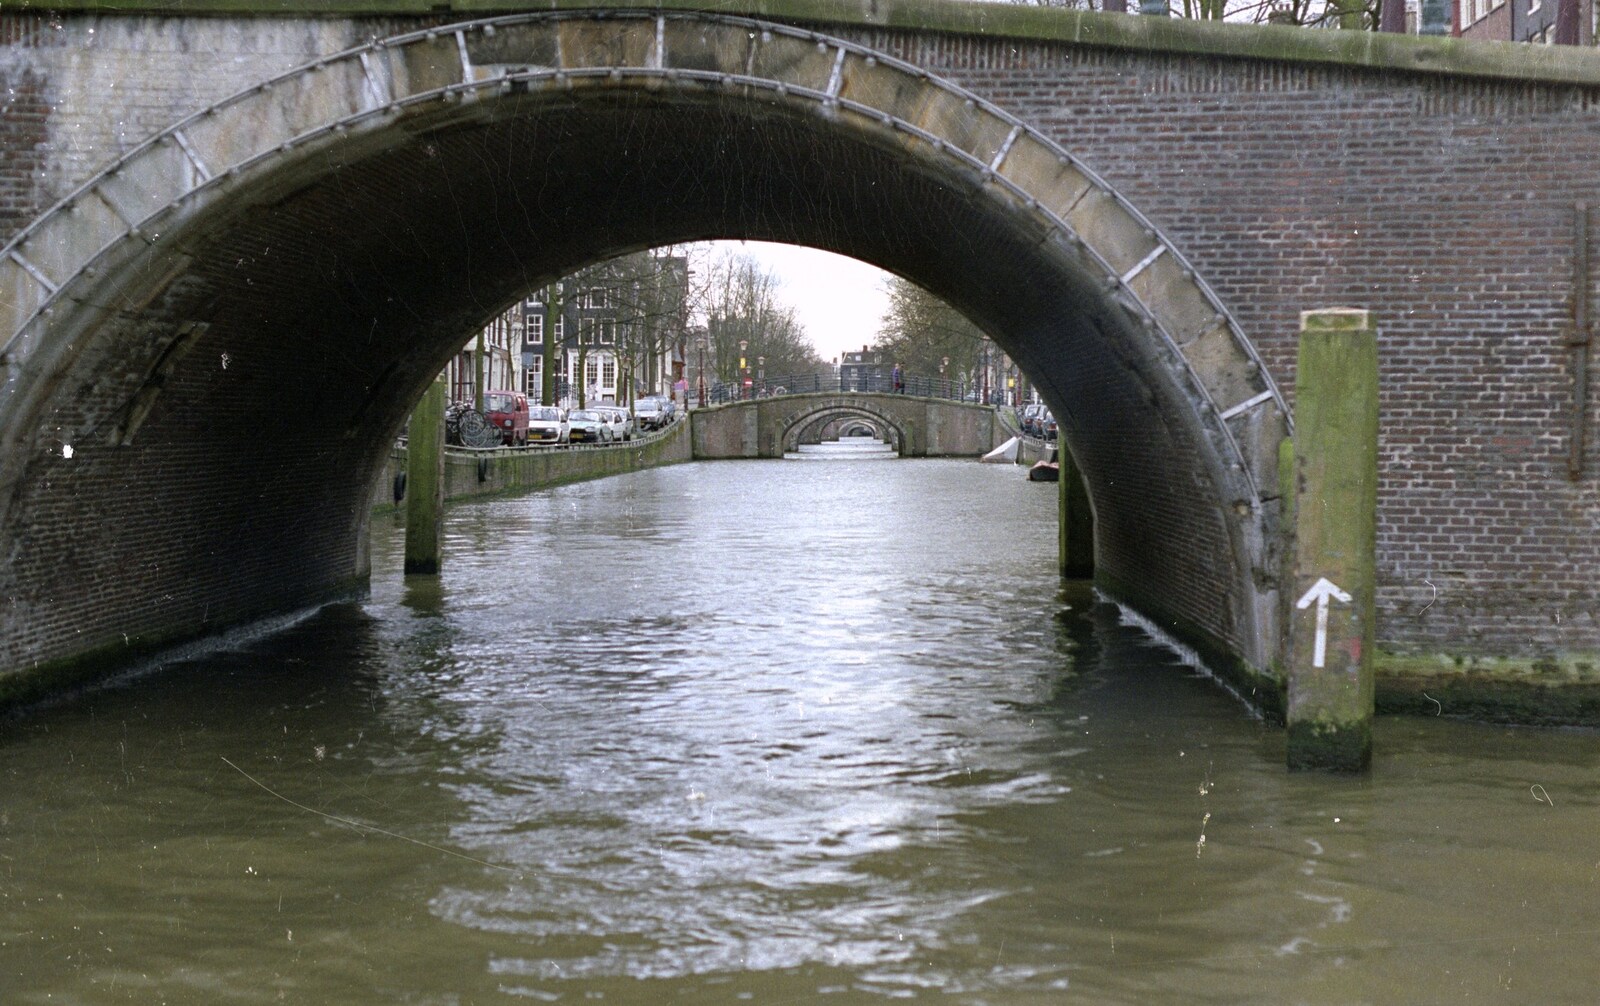 Out and About in Amsterdam, Hoorne, Vollendam and Edam, The Netherlands - 26th March 1992: Infinite bridges